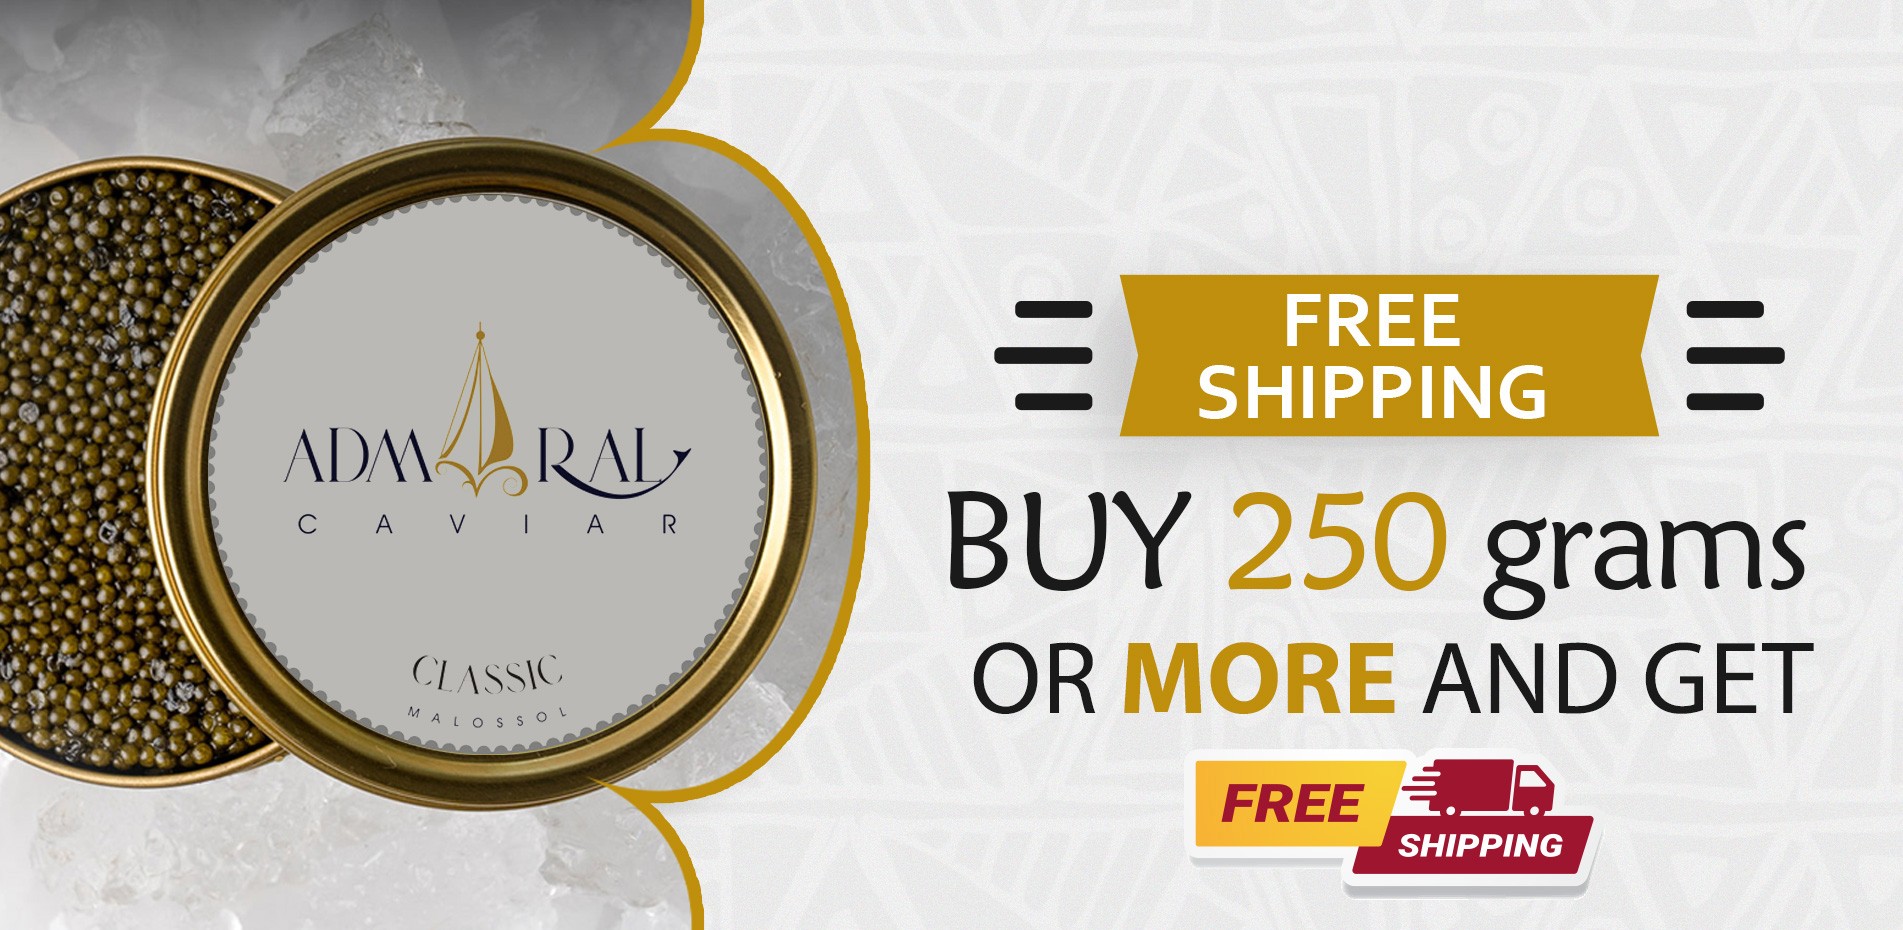 Buy 250 grams or More and get FREE SHIPPING